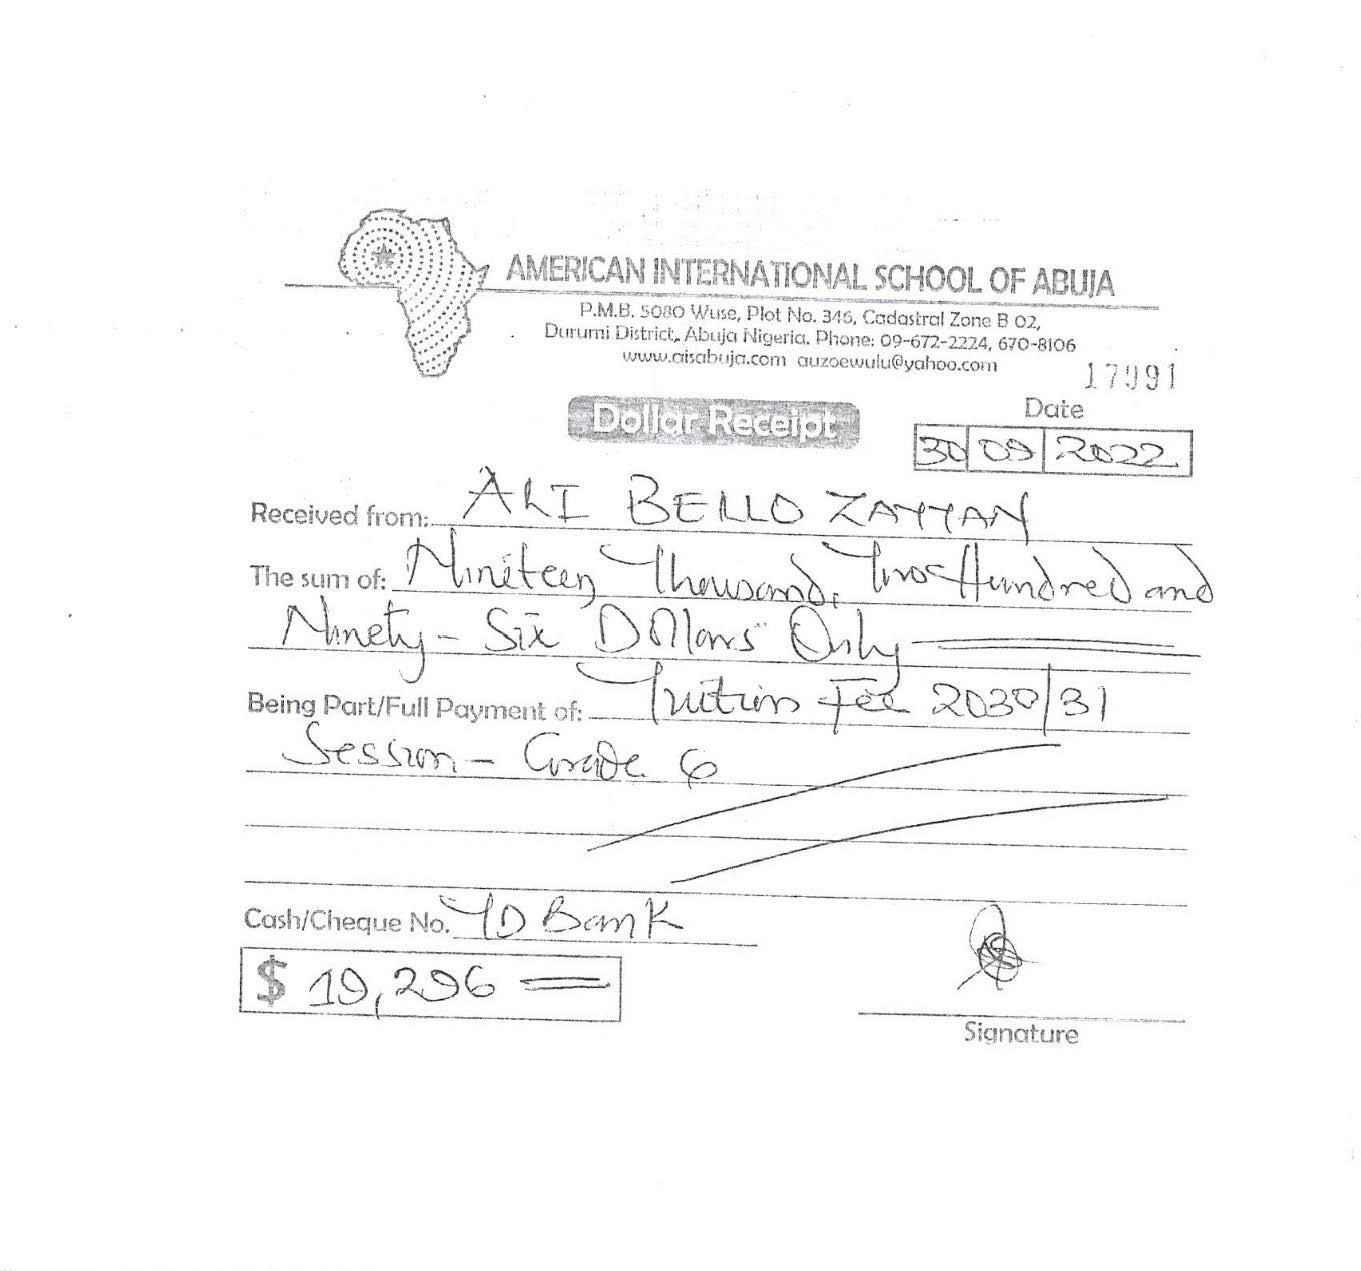 CHILDREN RECEIPTS Yahaya Bello paid 21470 and 19296 for his